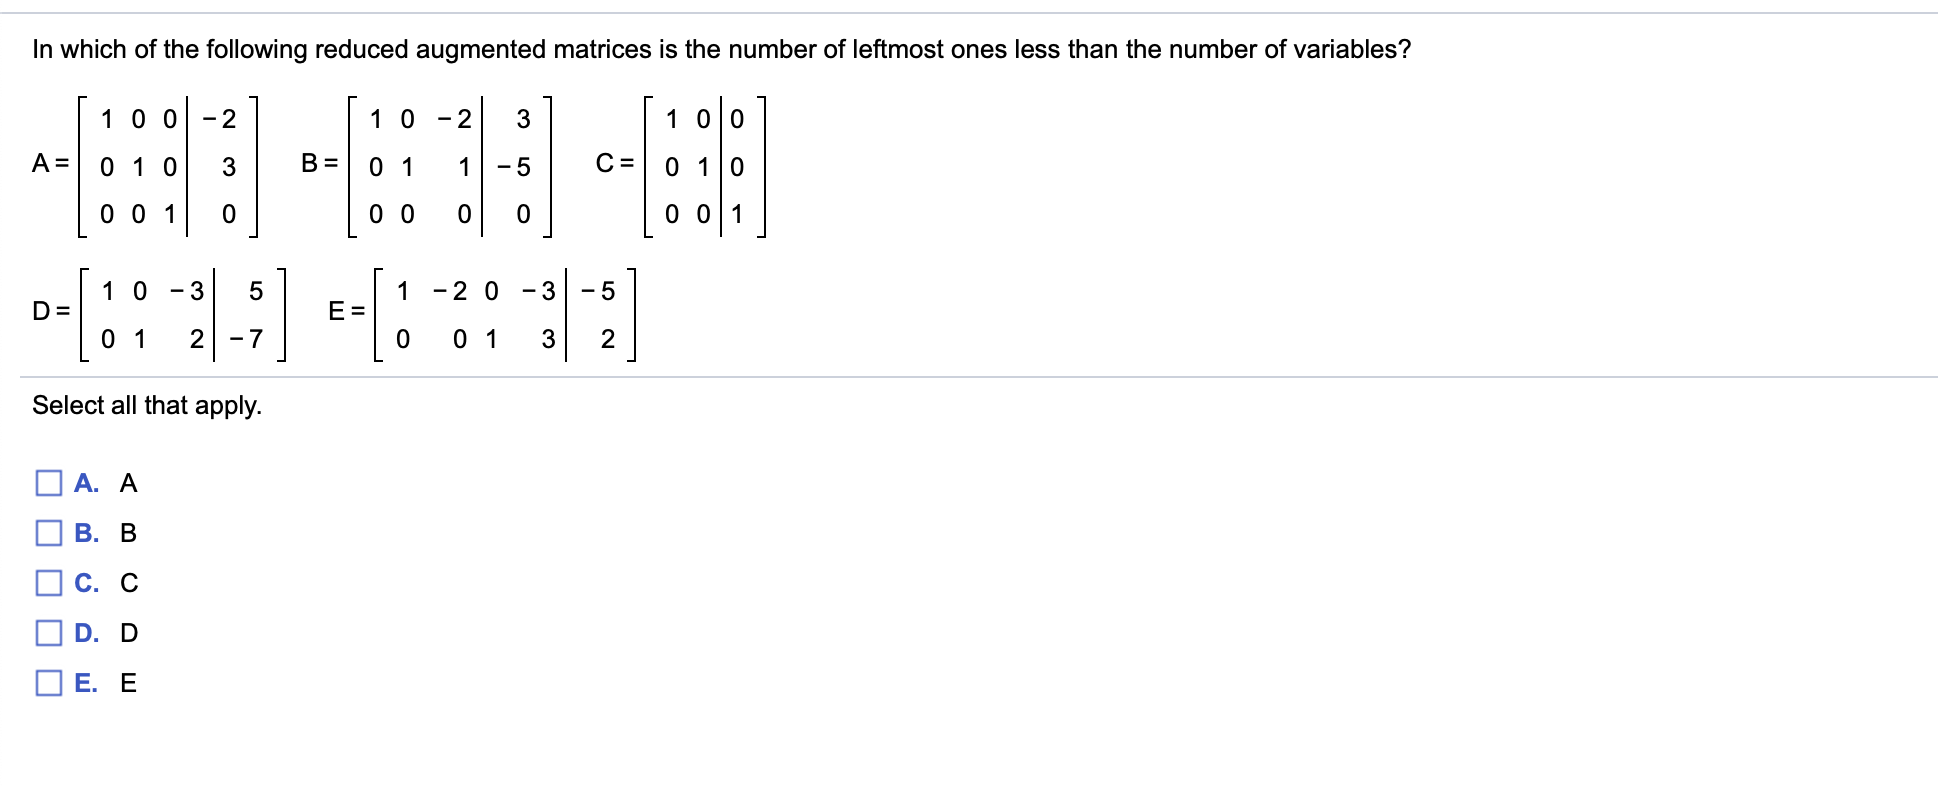 In which of the following reduced augmented matrices is the number of leftmost ones less than the number of variables?
1 0 0
1 0 0
2
1 0
2
3
-
A =
В
0 1
С
0 1 0
0 1 0
3
1
- 5
0 0 1
0 0
0 01
0
1 0
1
-2 0
-3
- 5
D =
E
0 1
0 1
2
7
0
3
2
Select all that apply.
A. A
В. В
С. С
D. D
Е. Е
